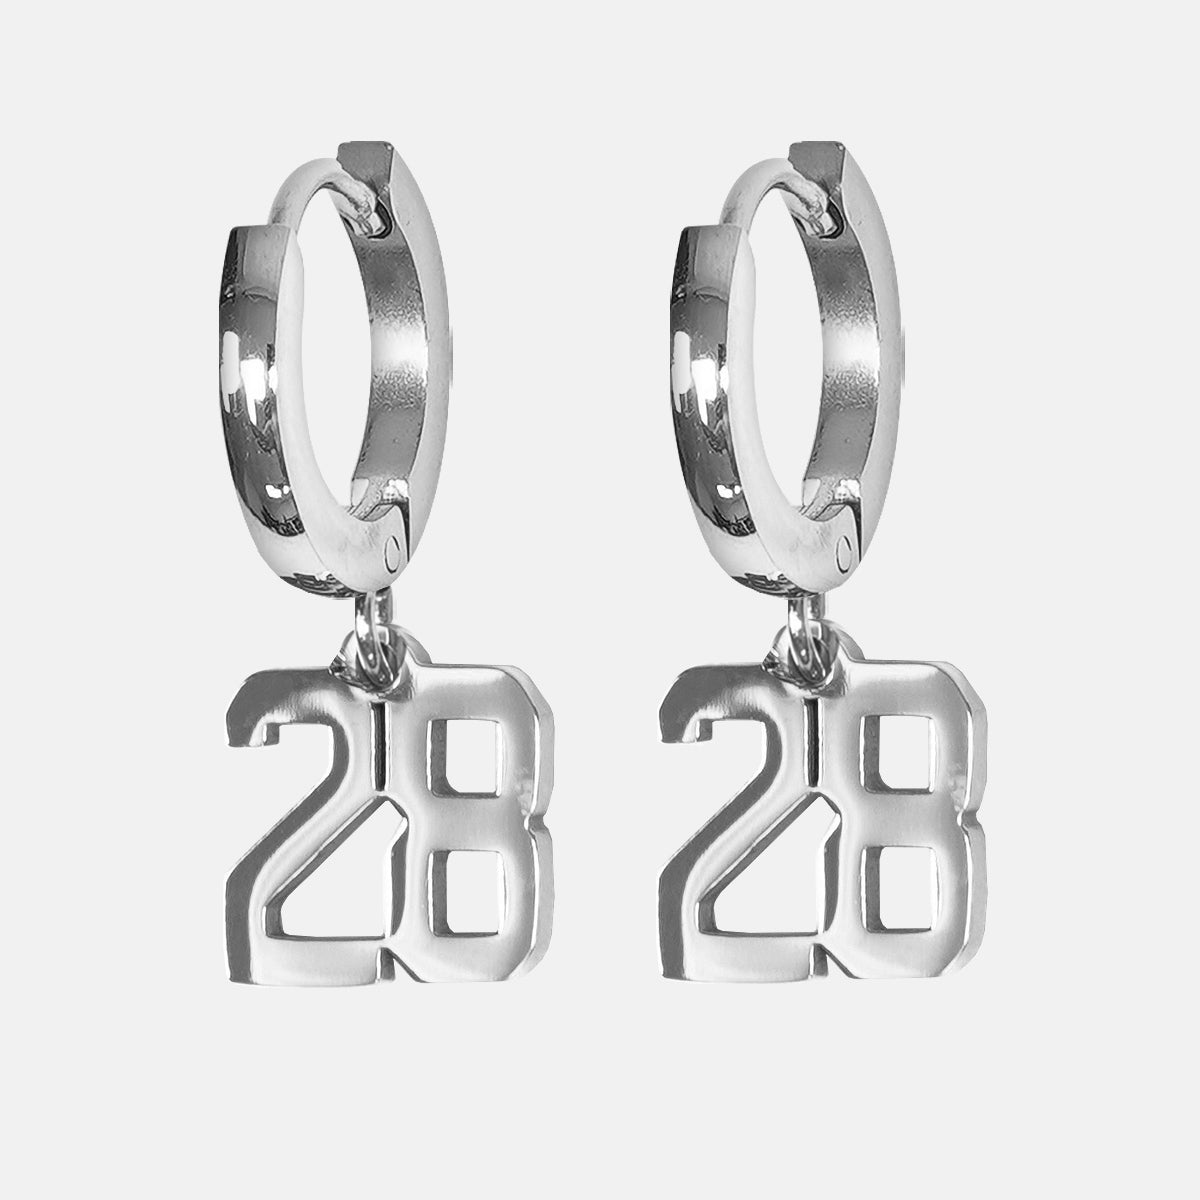 28 Number Earring - Stainless Steel